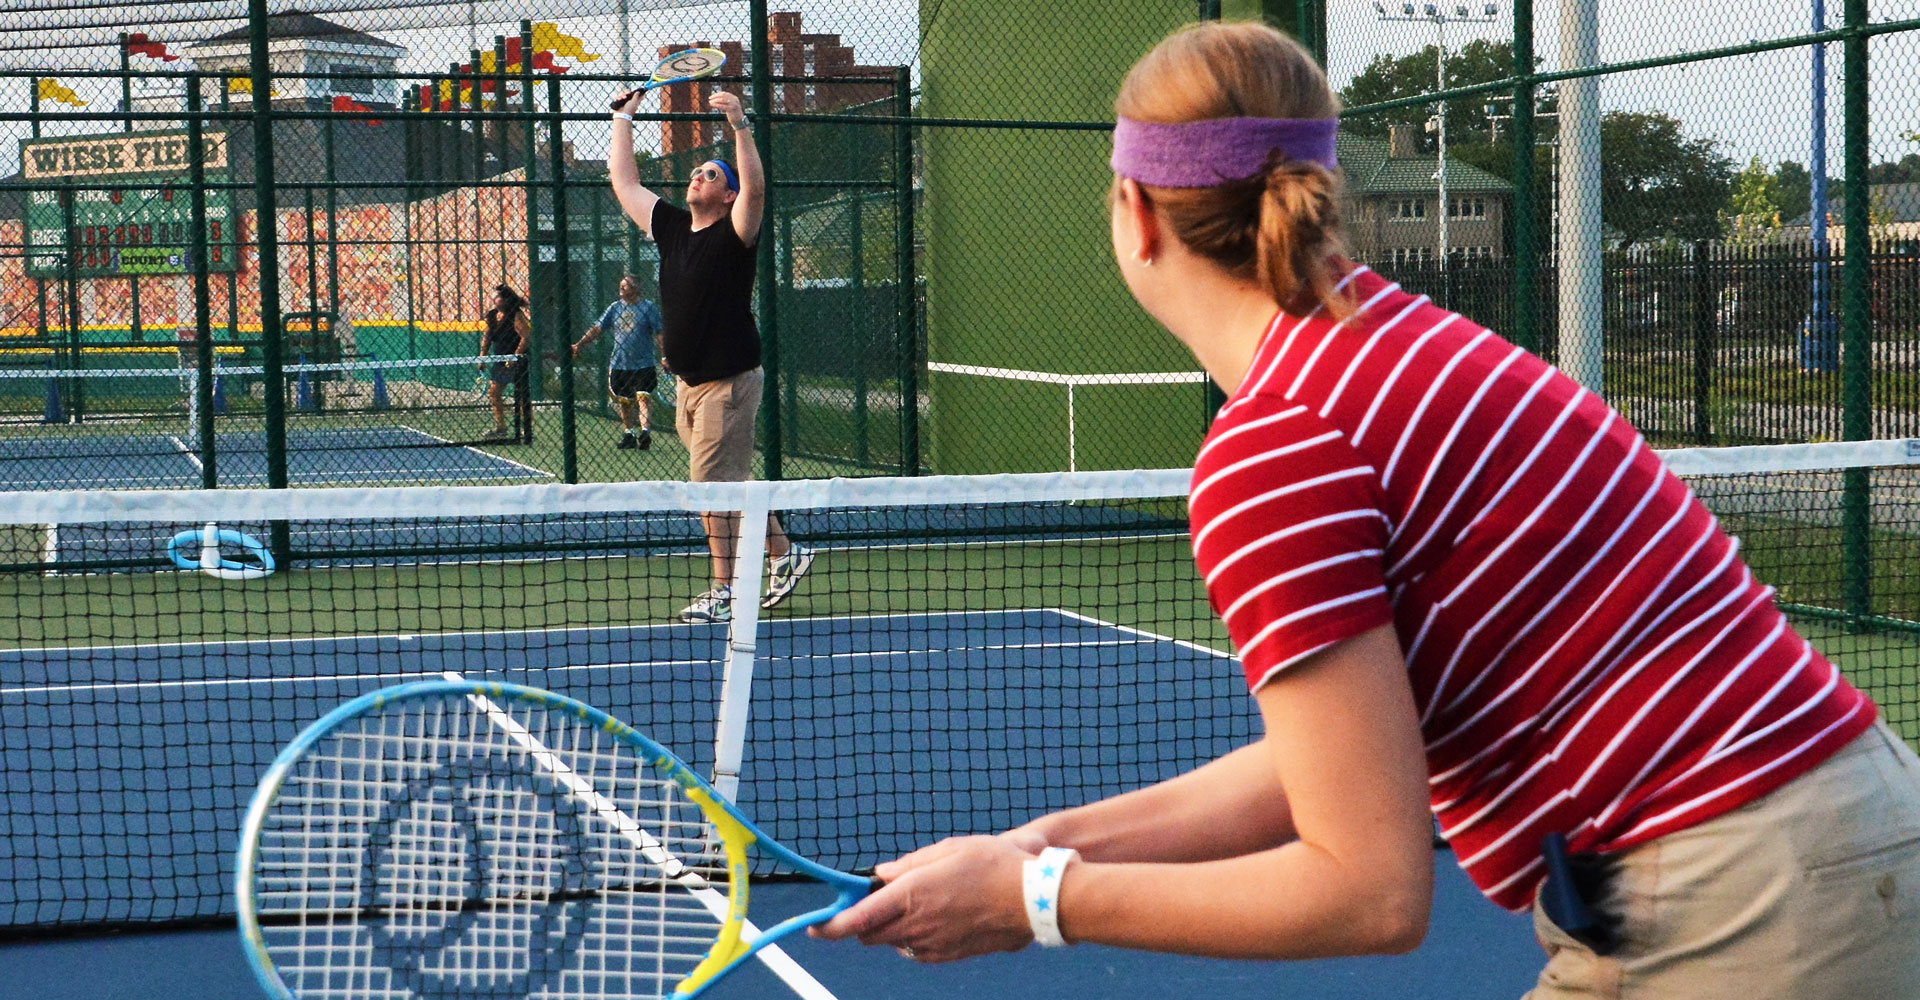 Grown-up playing tennis. One is holding a tennis racquet. Another is holding arms up in victory.